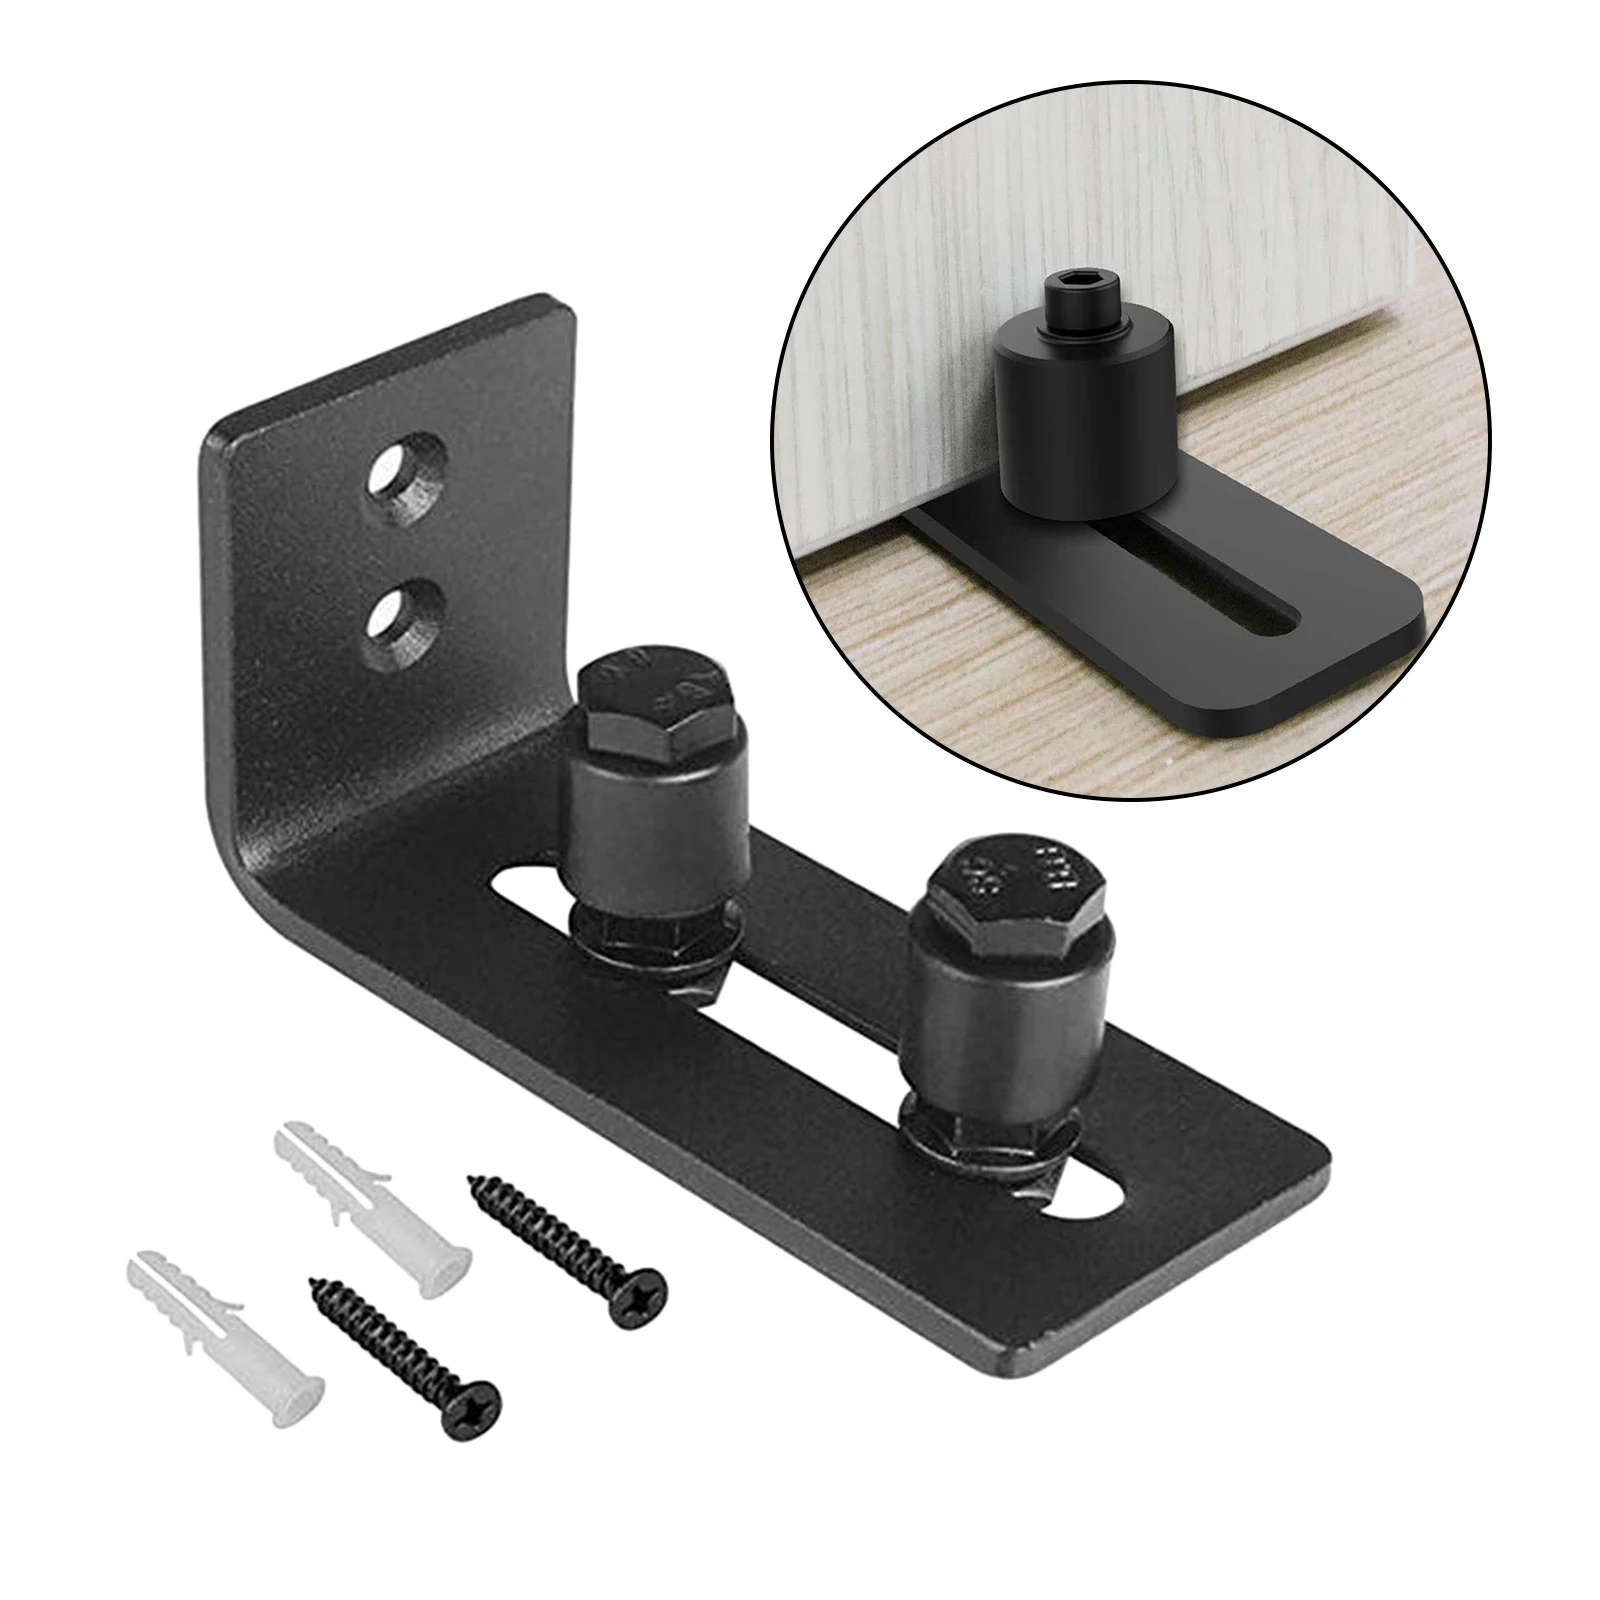 Barn Door Floor Guide Wall Mounted Stay Roller Guides for Garage Shed Doors, Easy to Install